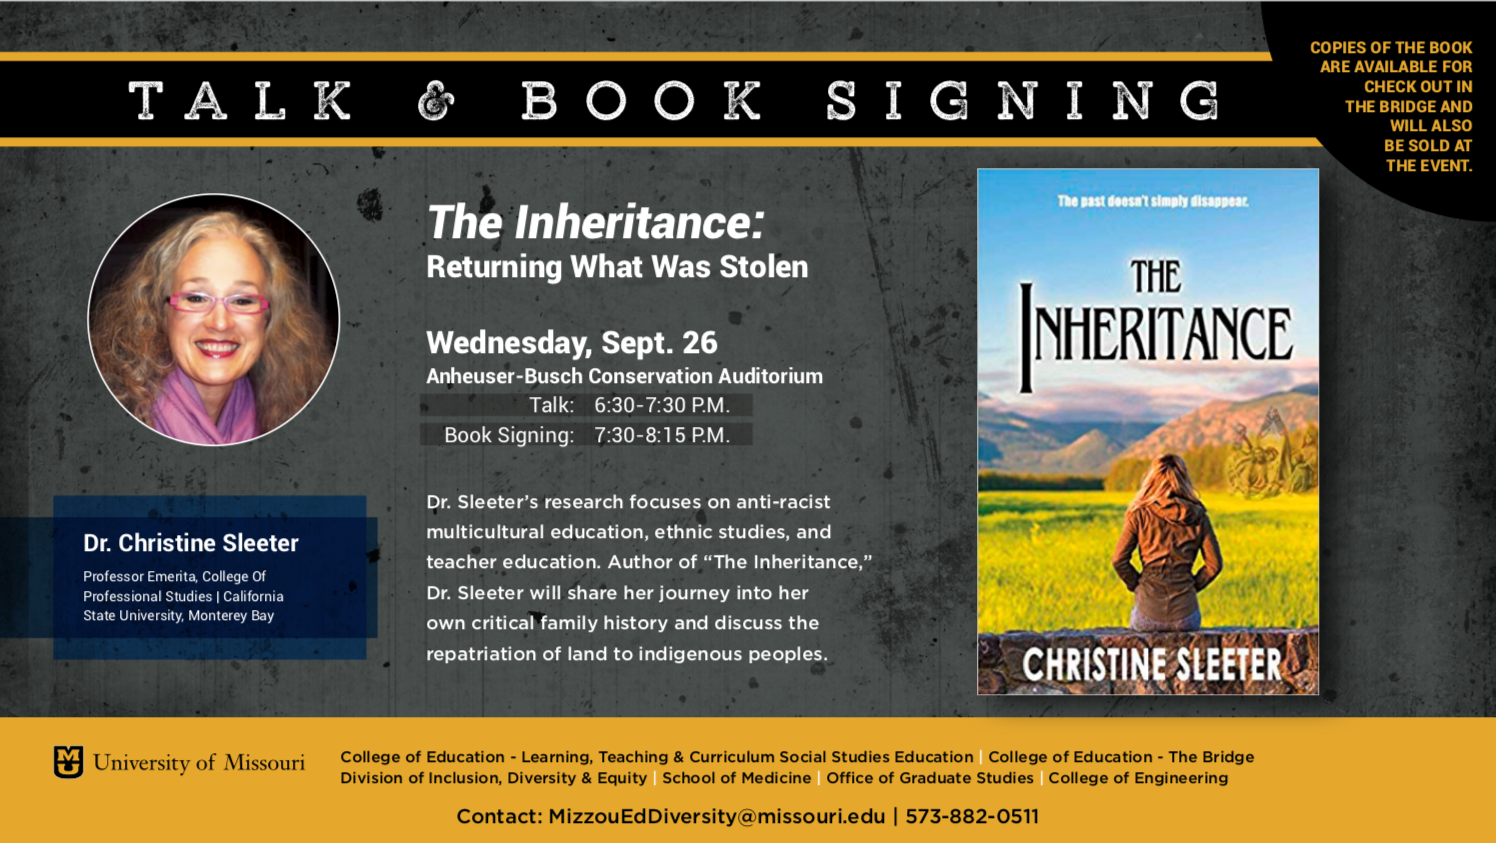 Christine Sleeter event flyer for a lecture and book signing